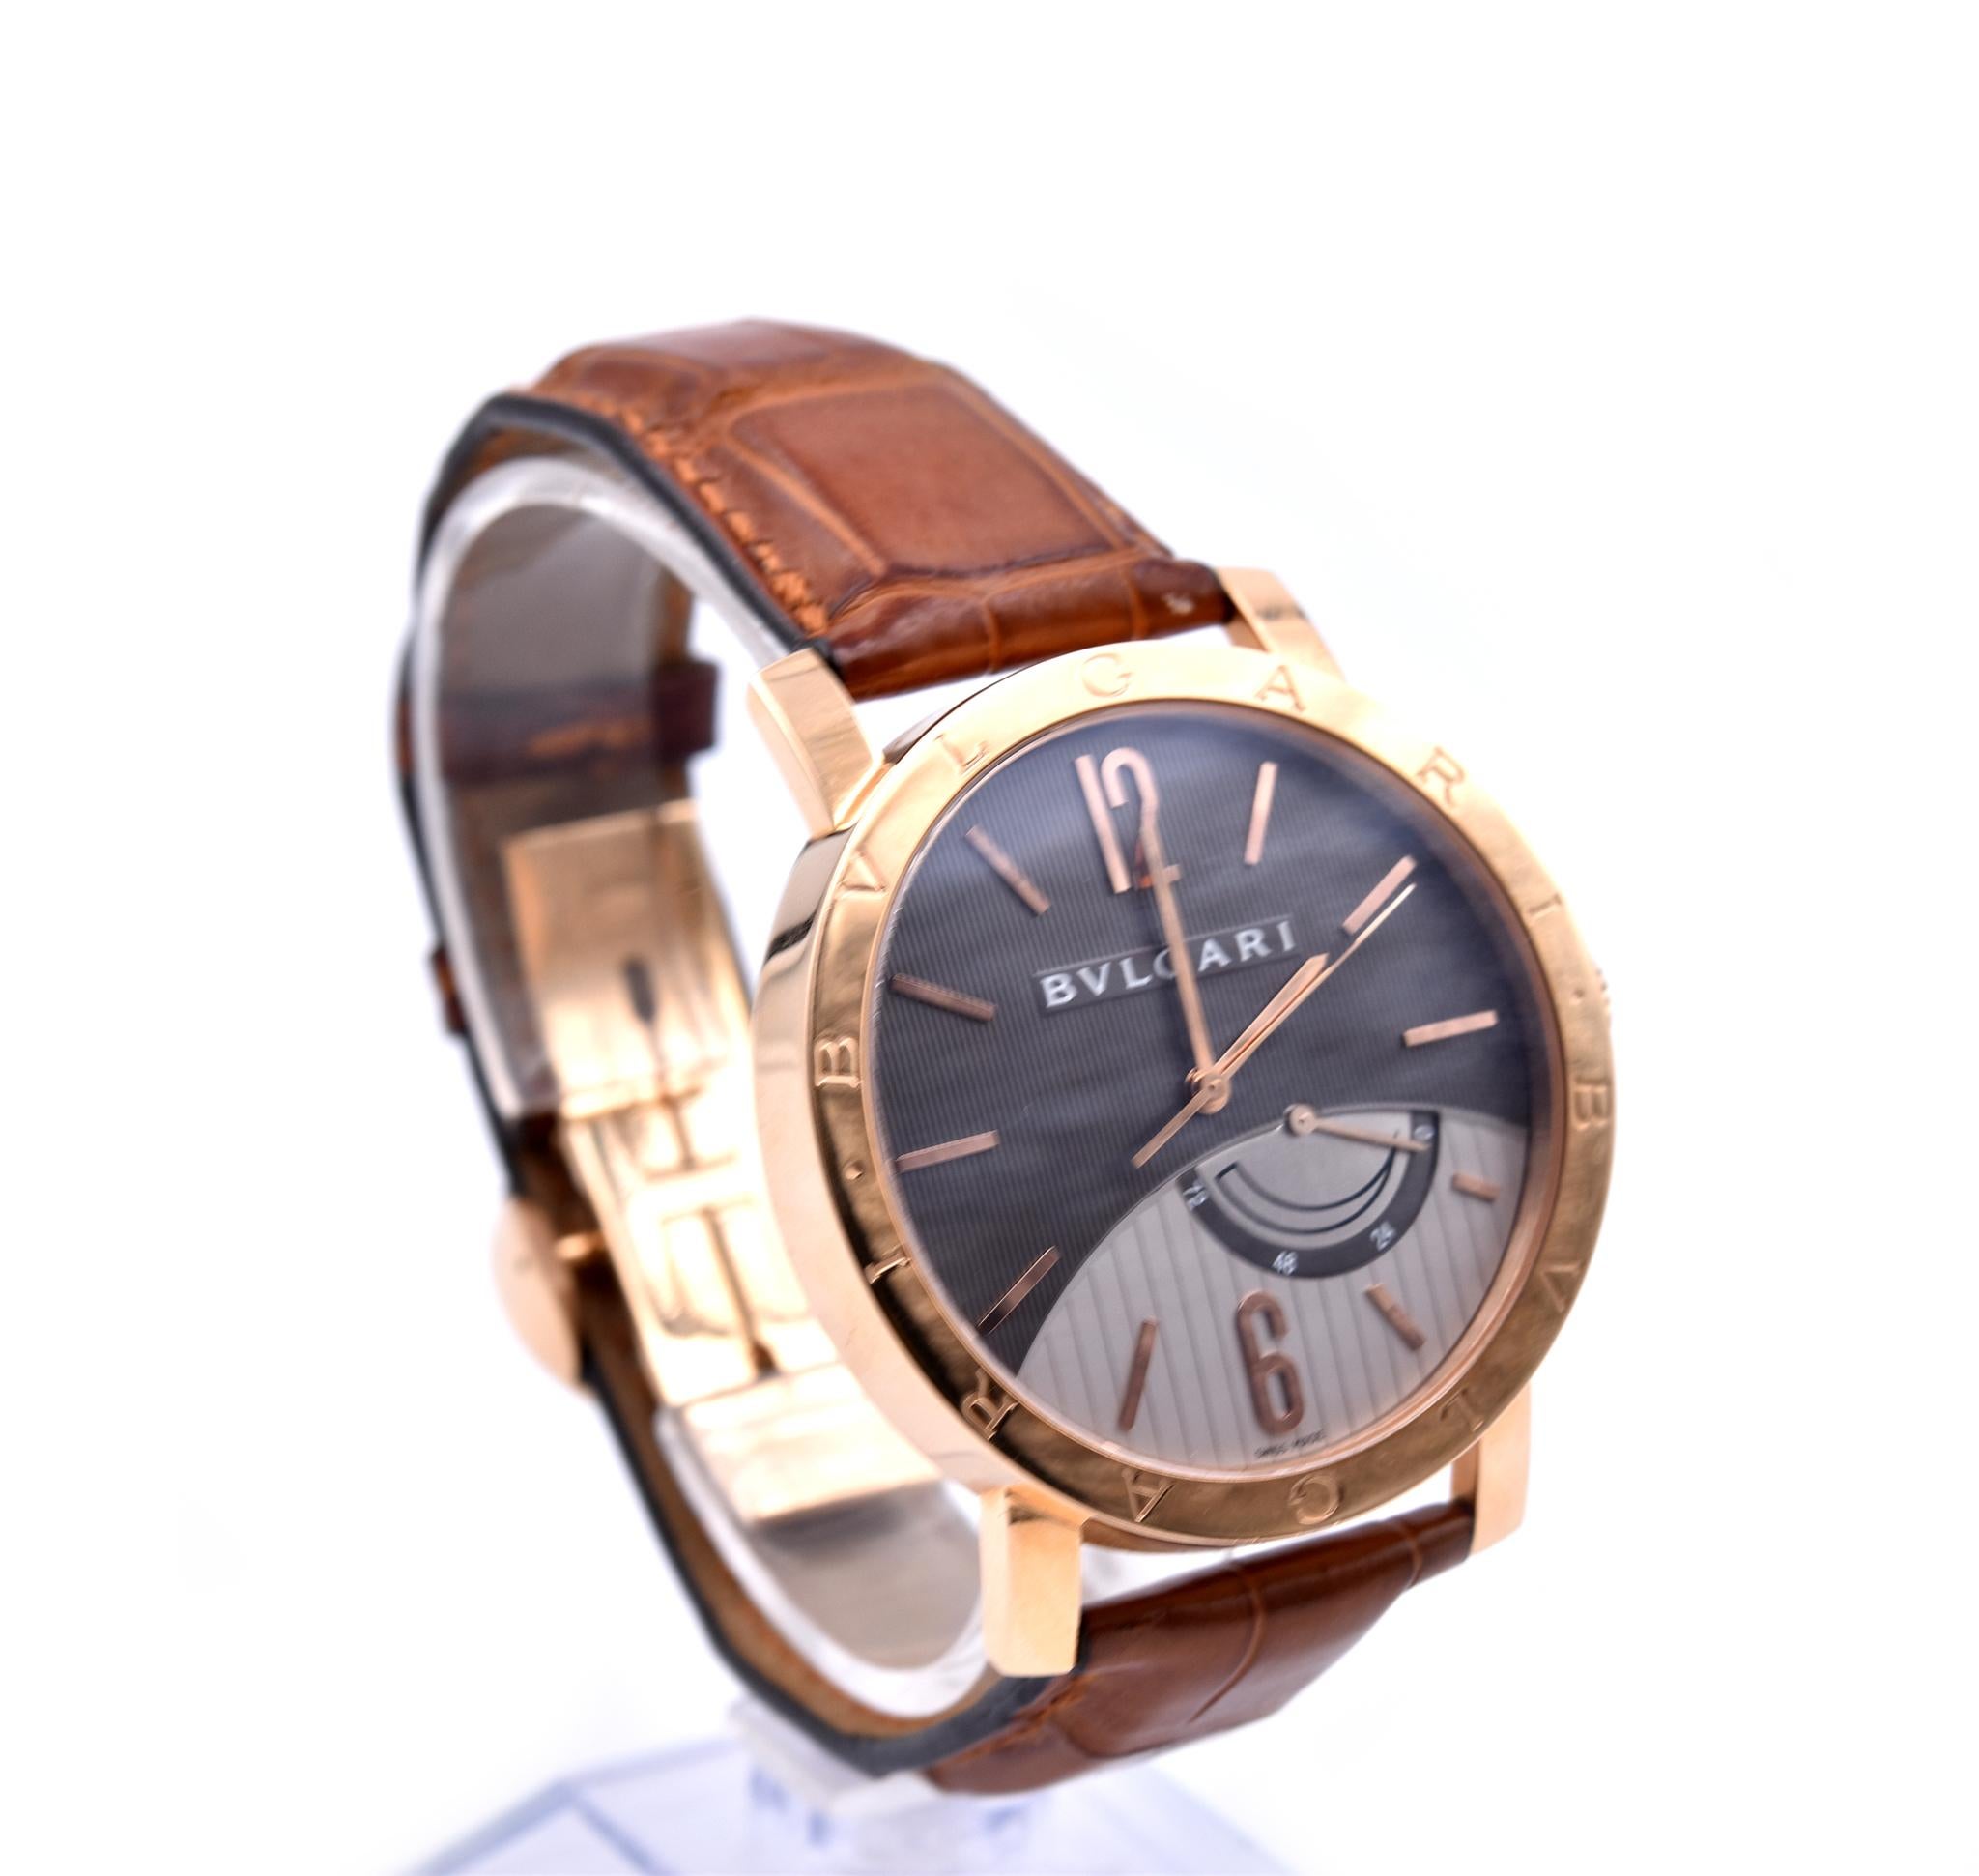 Movement: automatic
Function: hours, minutes, date, power reserve indicator
Case: round 41mm rose gold case, sapphire protective crystal, 
Band: brown alligator with rose gold fold clasp hidden
Dial: silver dial with rose gold hands and Arabic